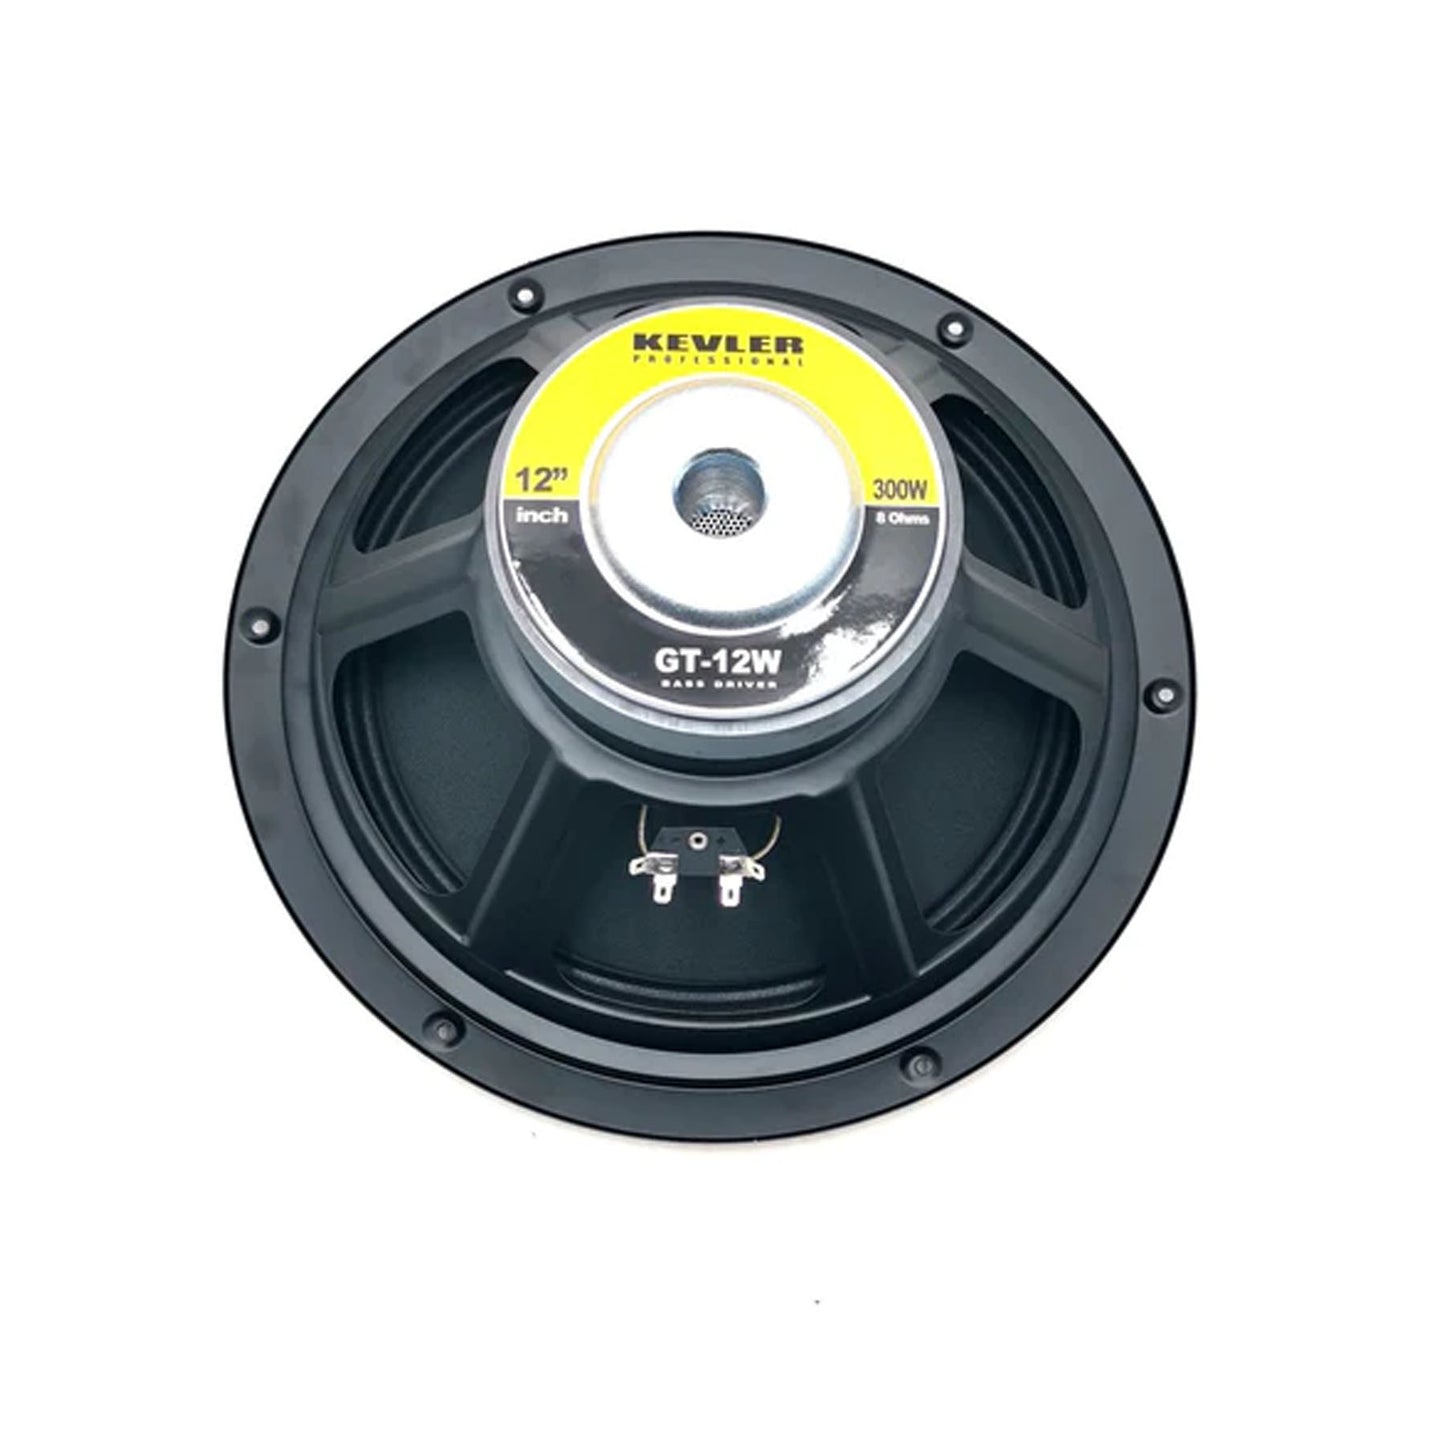 KEVLER GT-12W 300W 12" Base Speaker Driver with 50Hz-7KHz Frequency Response, 98dB Sensitivity Level and 8 Ohms Impedance